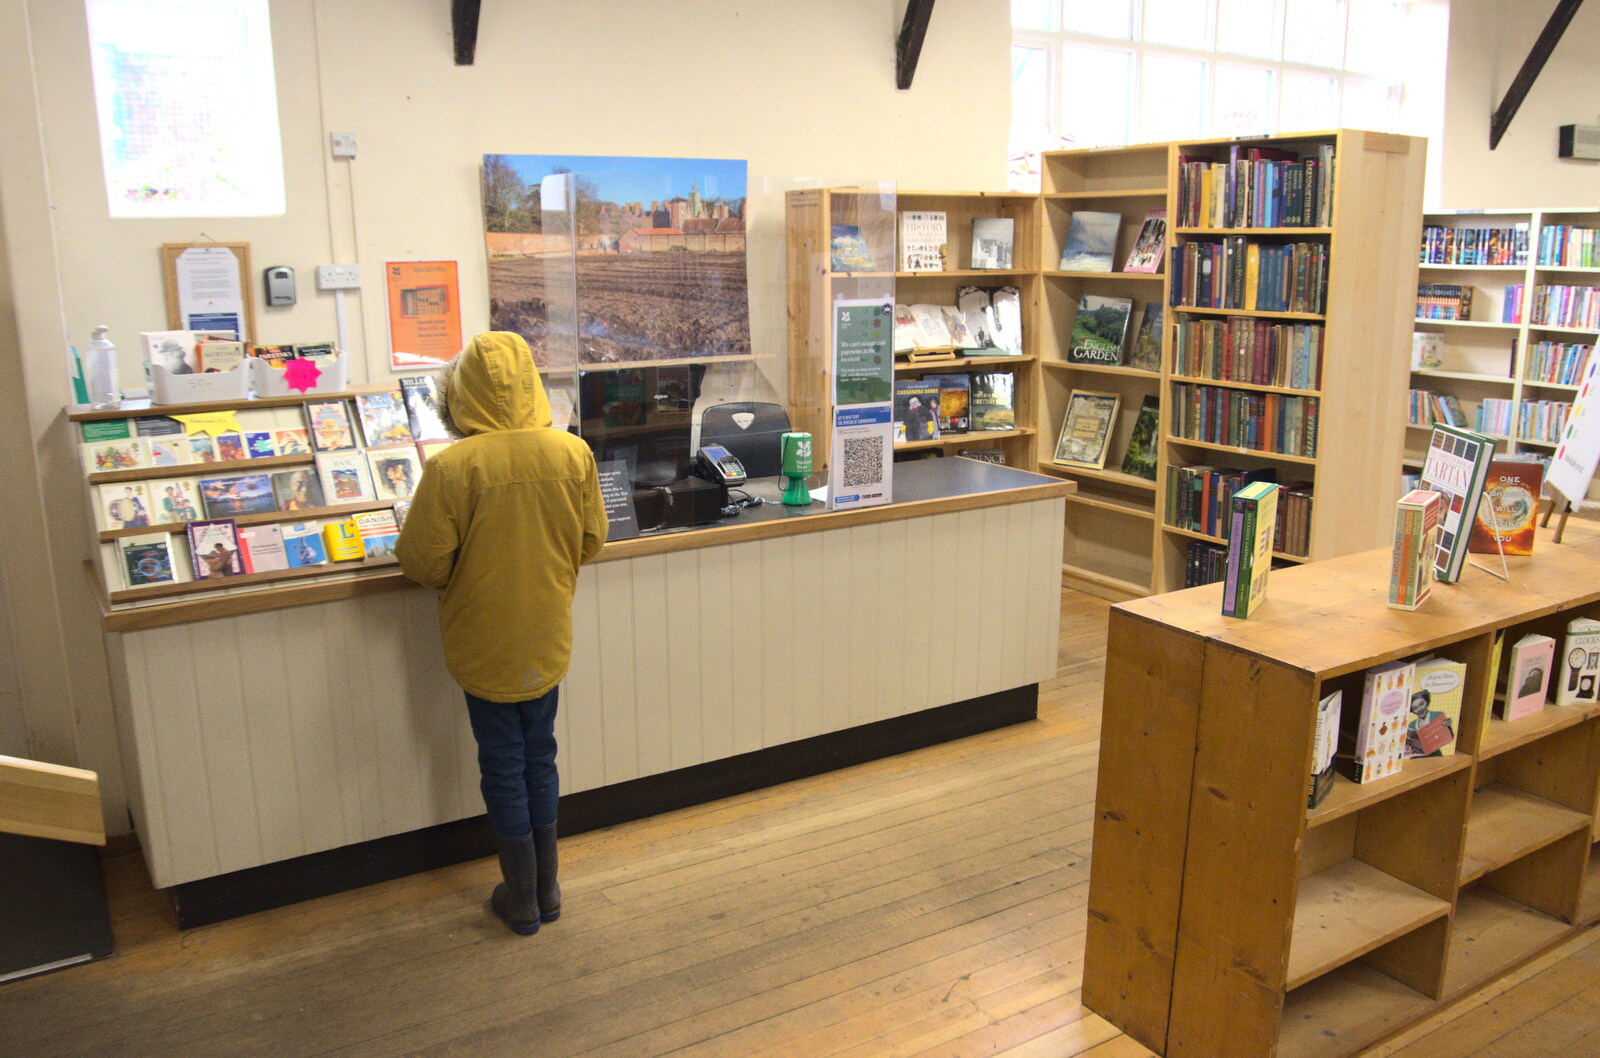 We're back in the second-hand book shop from A Visit to Blickling Hall, Aylsham, Norfolk - 9th January 2022